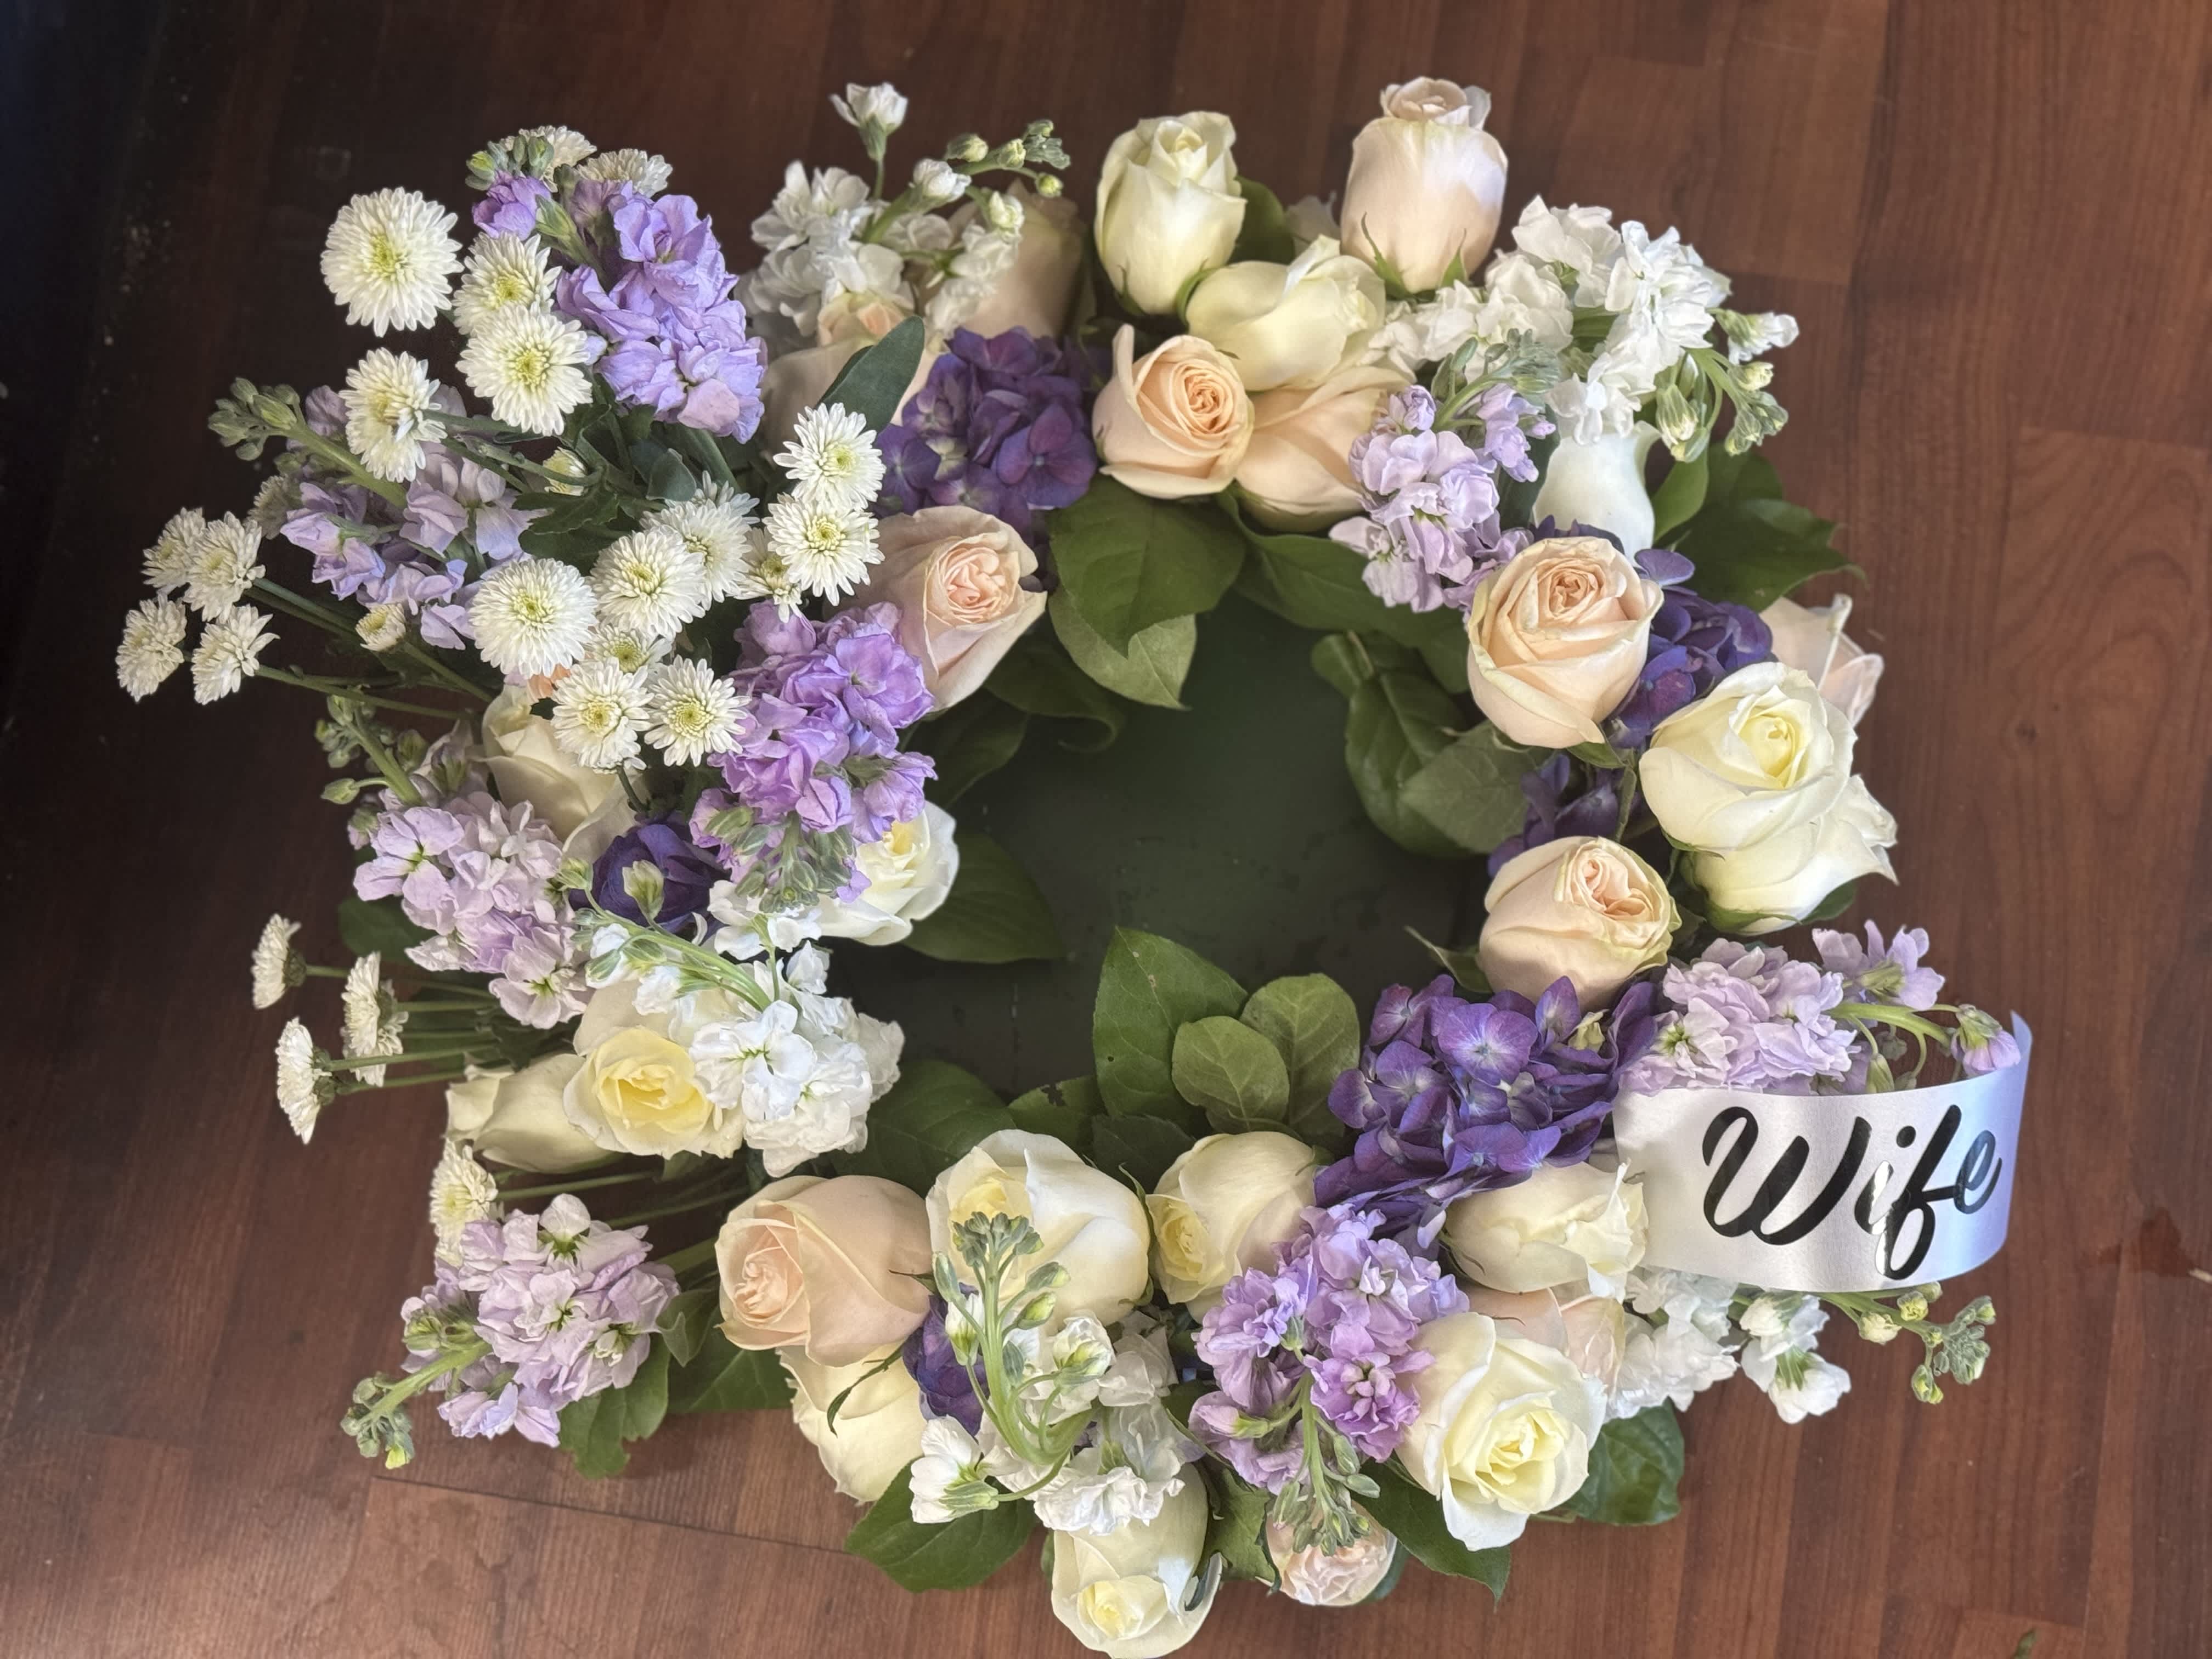 BEAUTY URN ARRANGEMENT WREATH - URN WREATH AVAILABLE IN ANY COLOR PALETTE THEME.